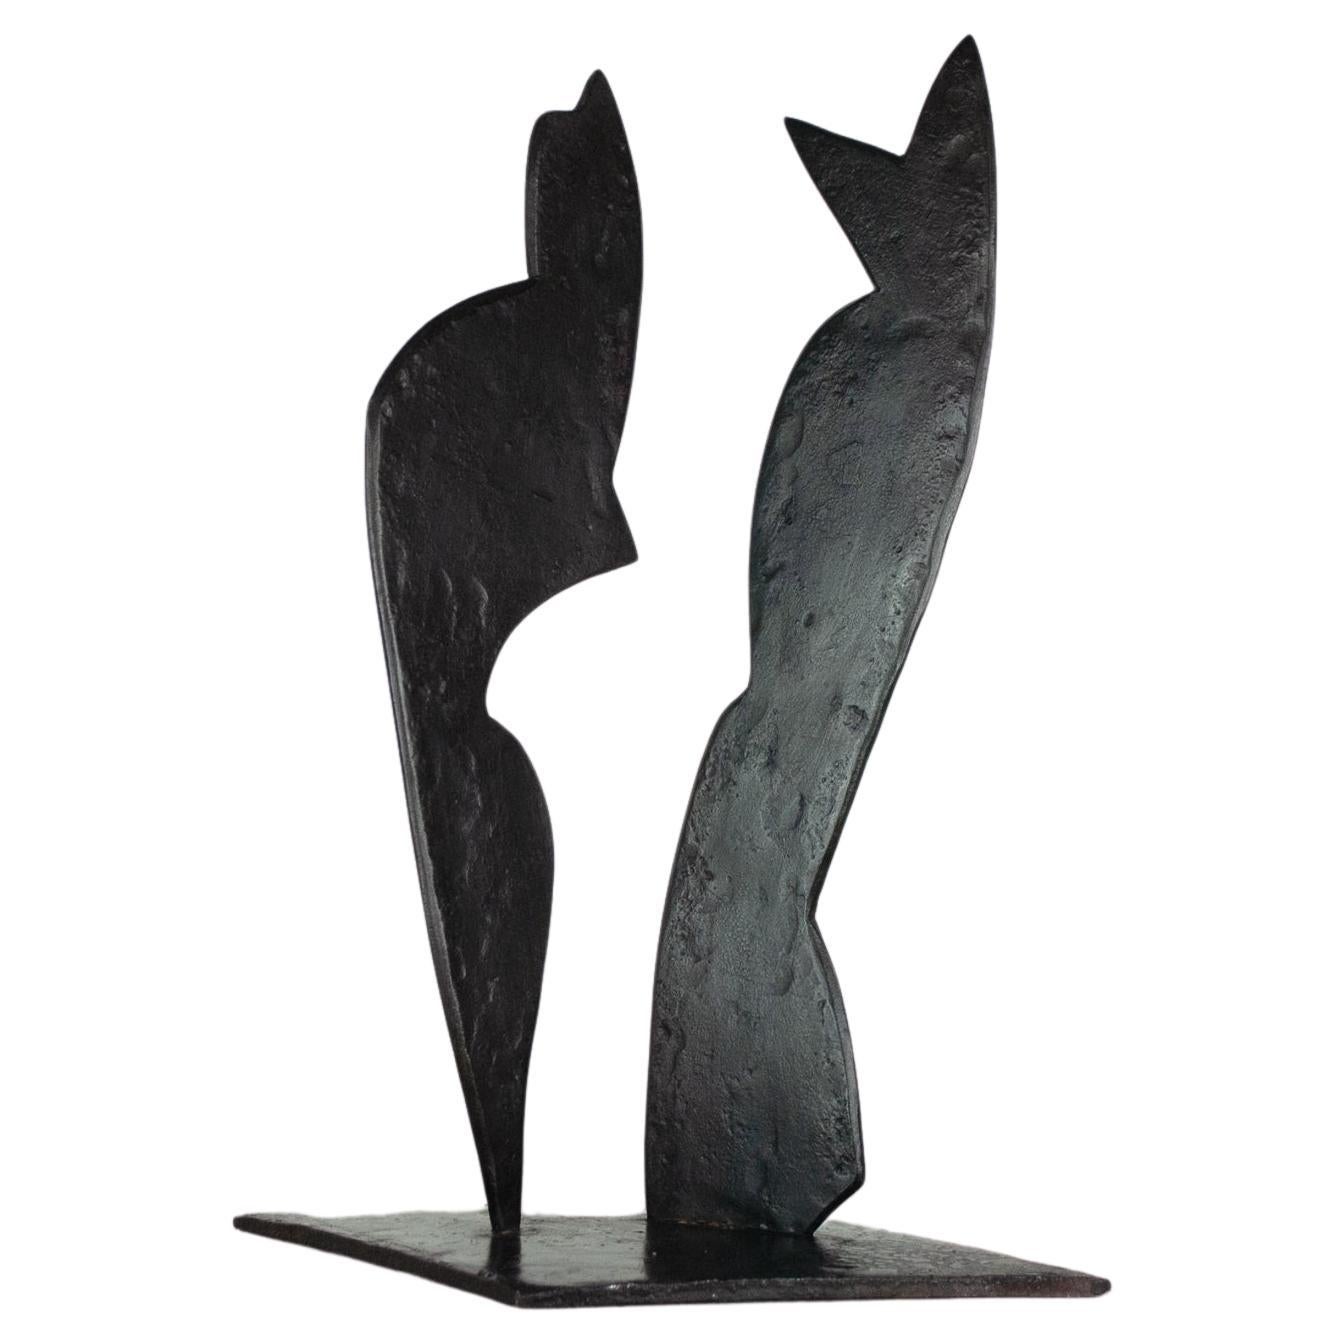 Contemporary Black Forged Steel Sculpture Inspired by H. Bertoia - Two Forms 02